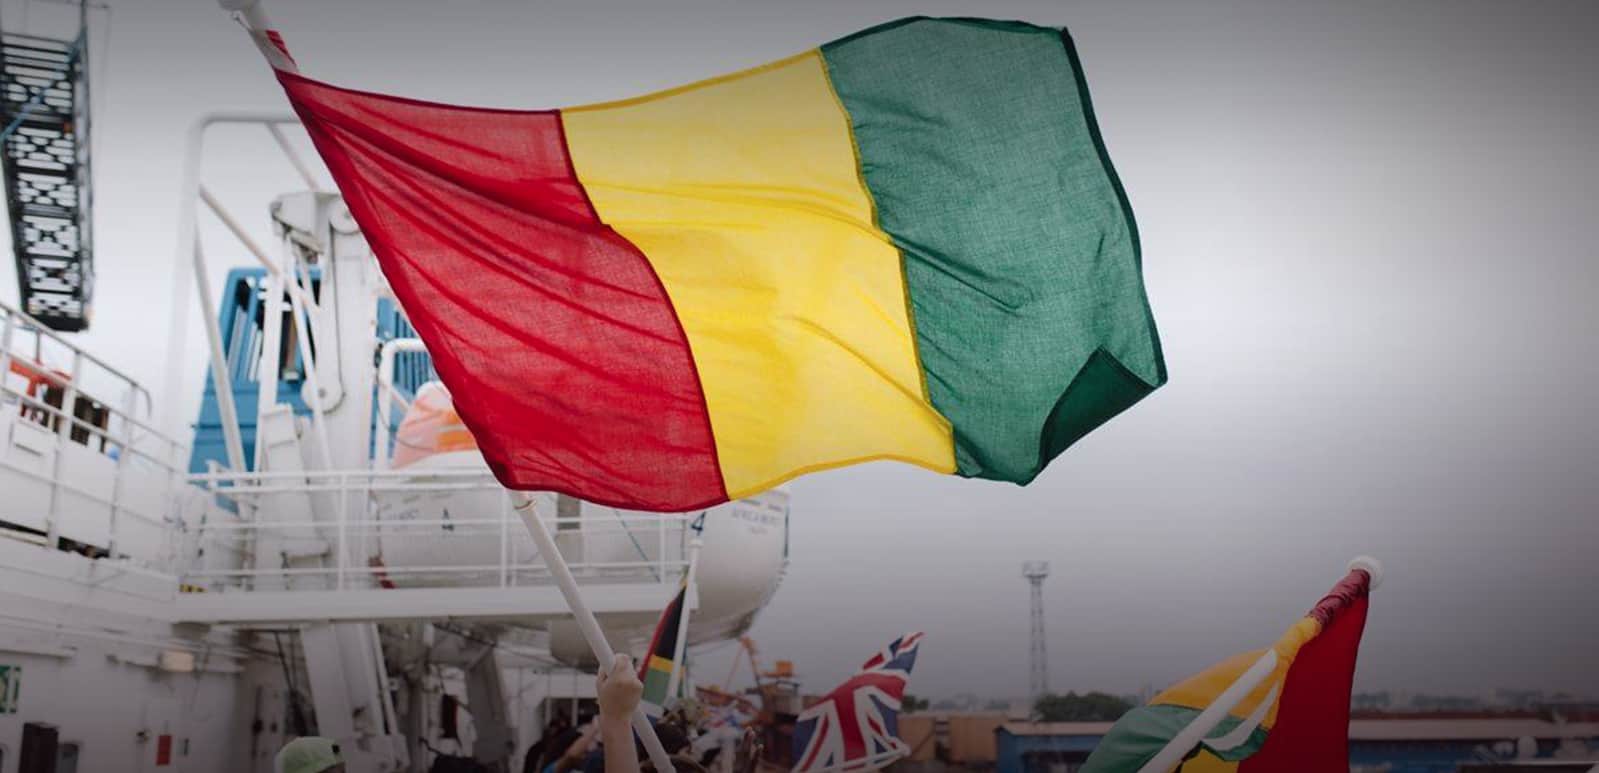 Largest Charity Hospital Ship Docked in Guinea